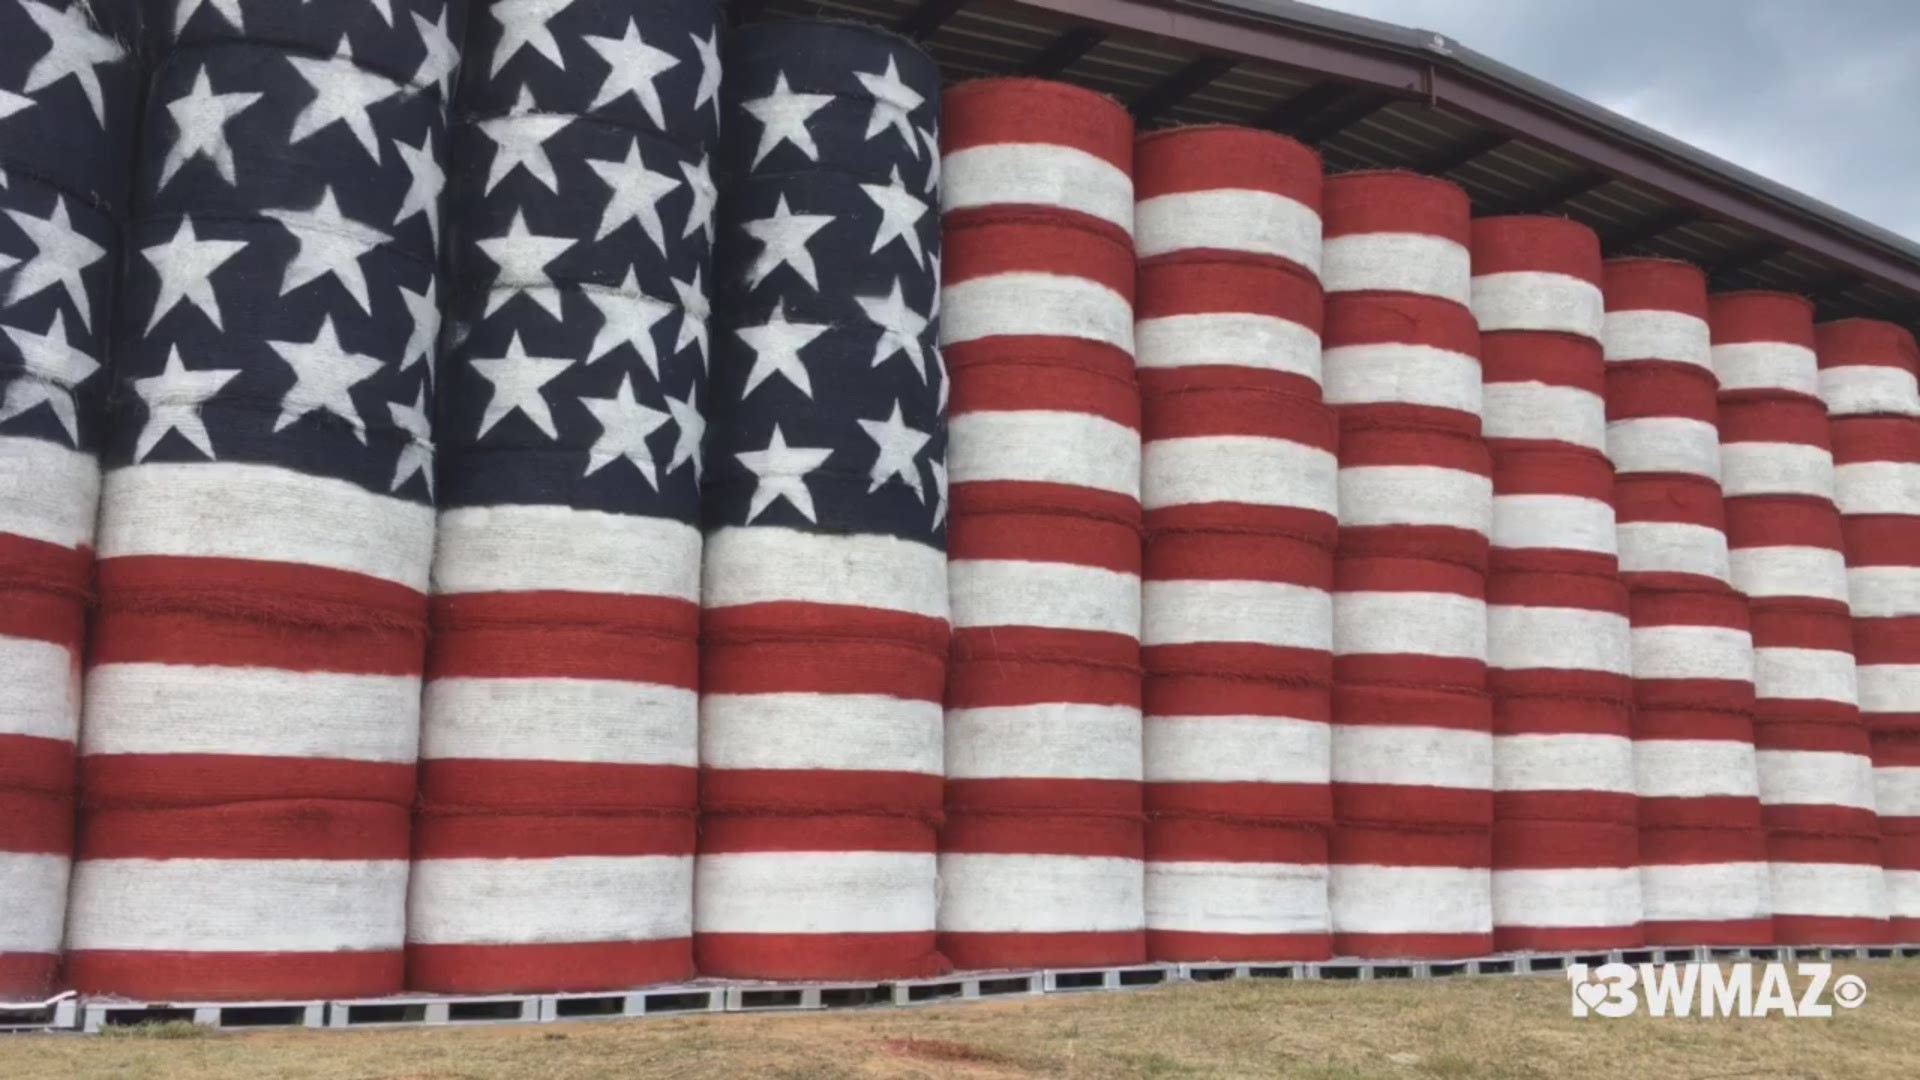 A group of Johnson County farmers came together to build a barn-sized American flag in Wrightsville